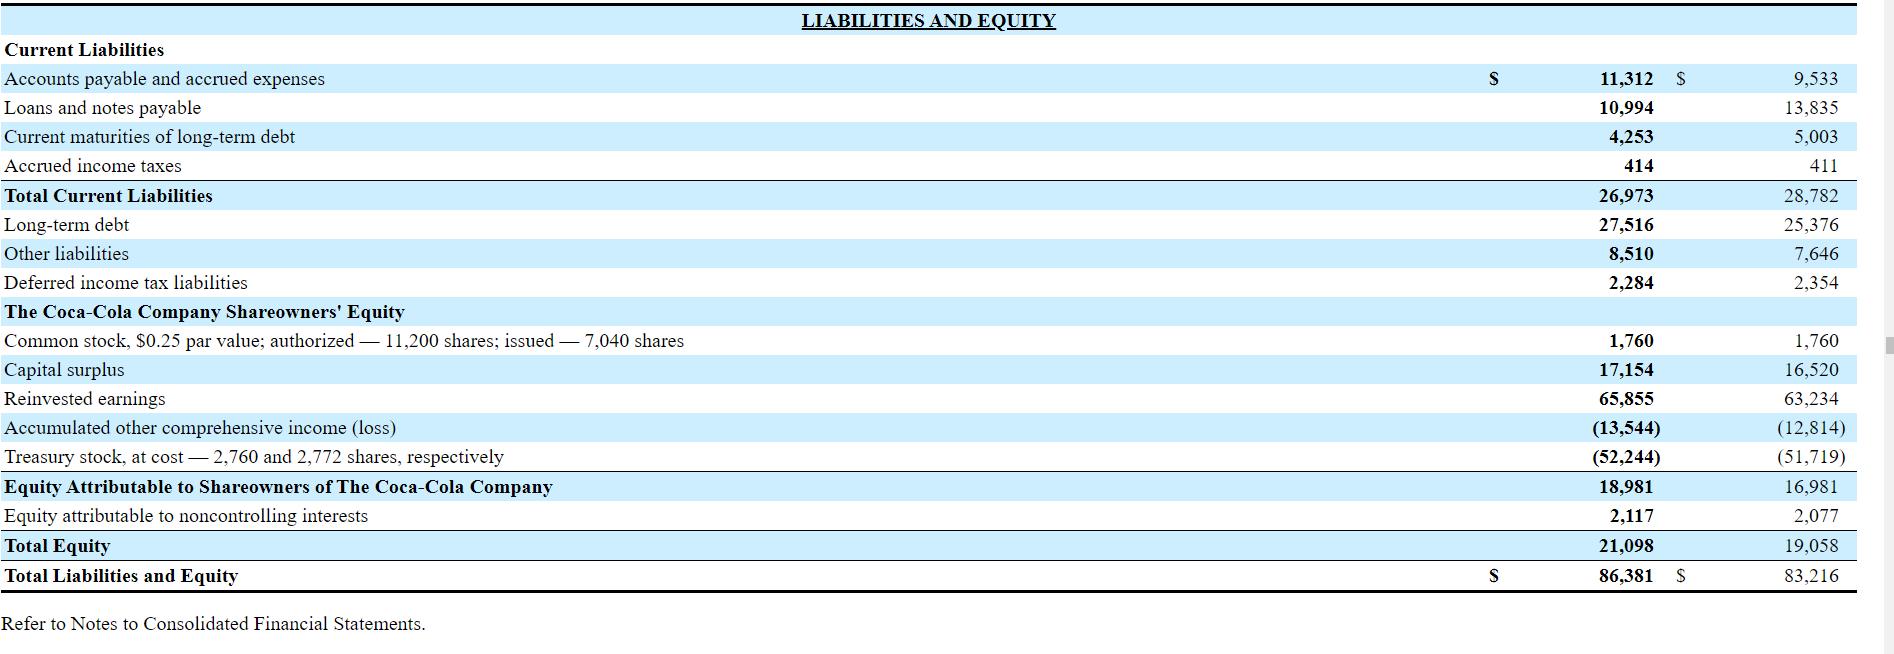 LIABILITIES AND EQUITY S11,312 S9,533 10,994 4,253 13,835 5,003 411 414 26,973 27,516 8,510 2,284 28,782 25,376 7,646 2,354